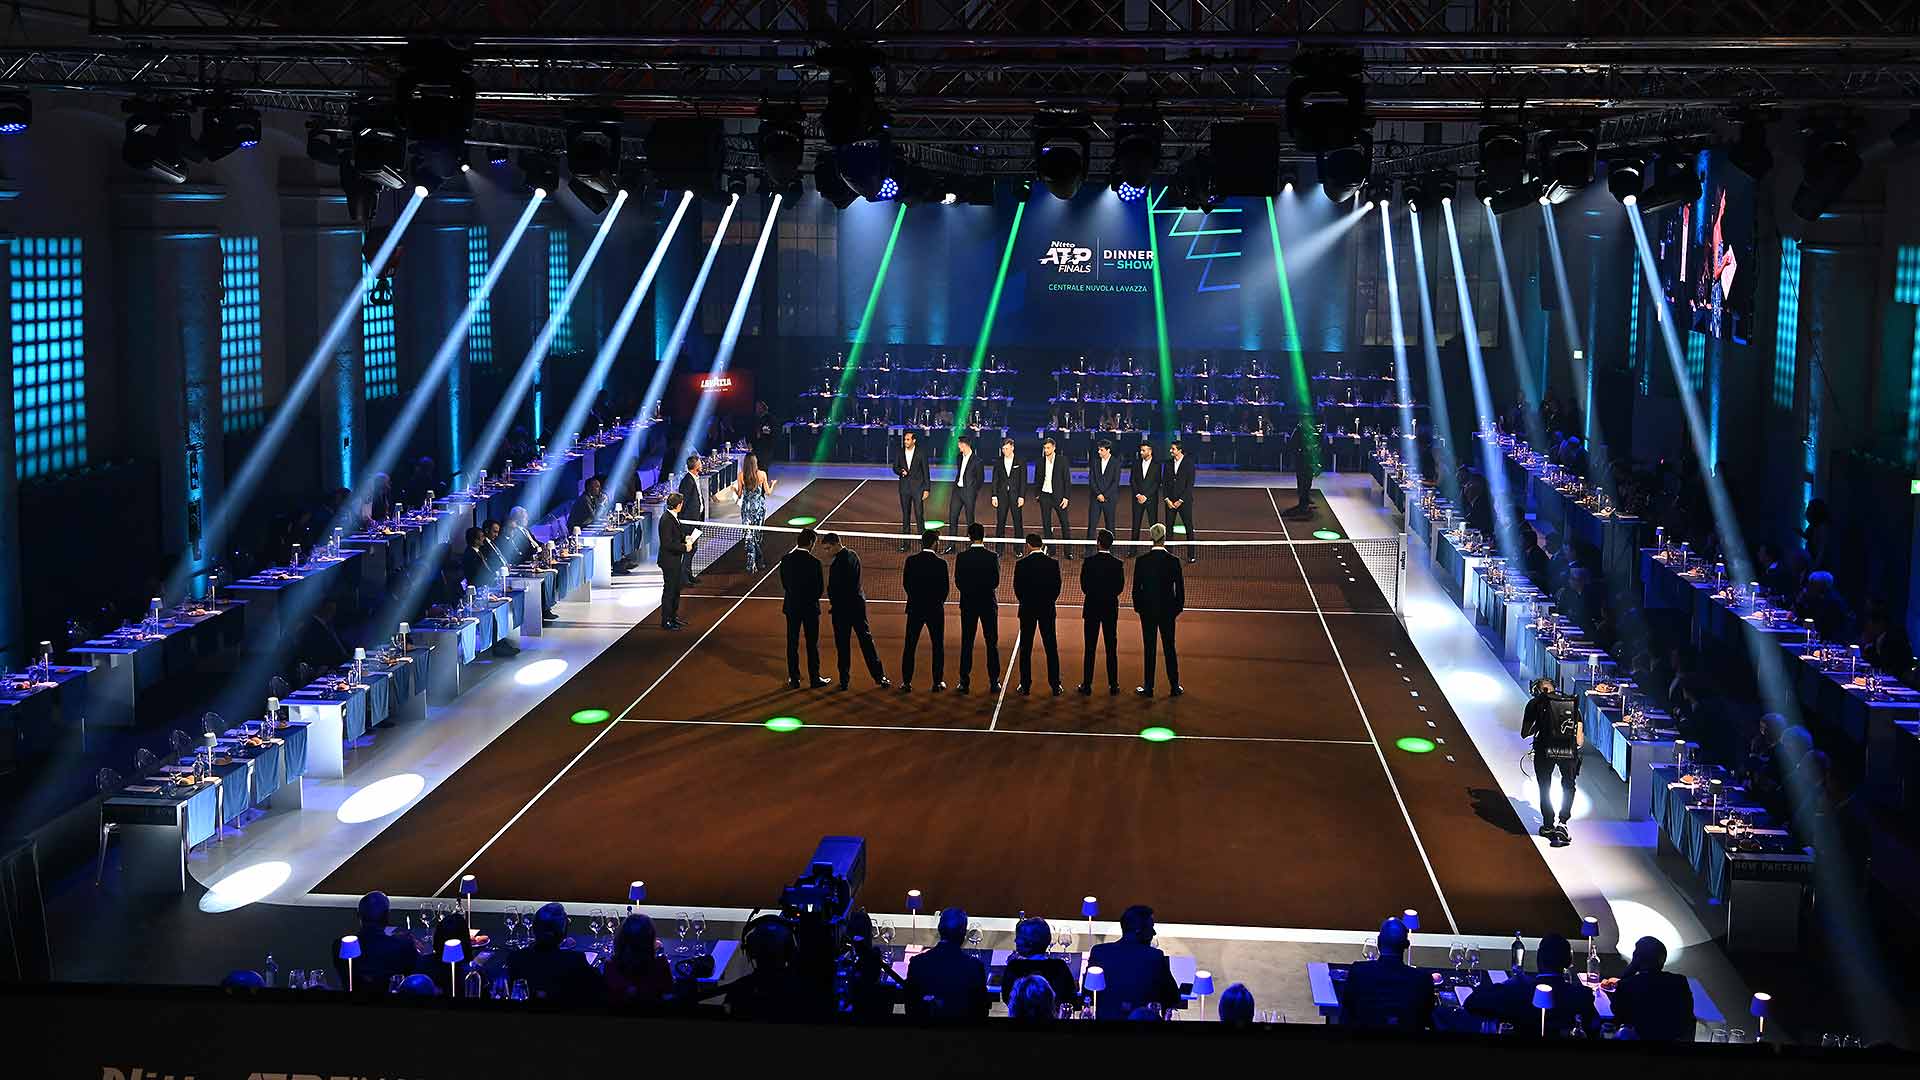 Final tournament ATP (Nitto ATP Finals) in Turin. The final. The award  ceremony for the winner